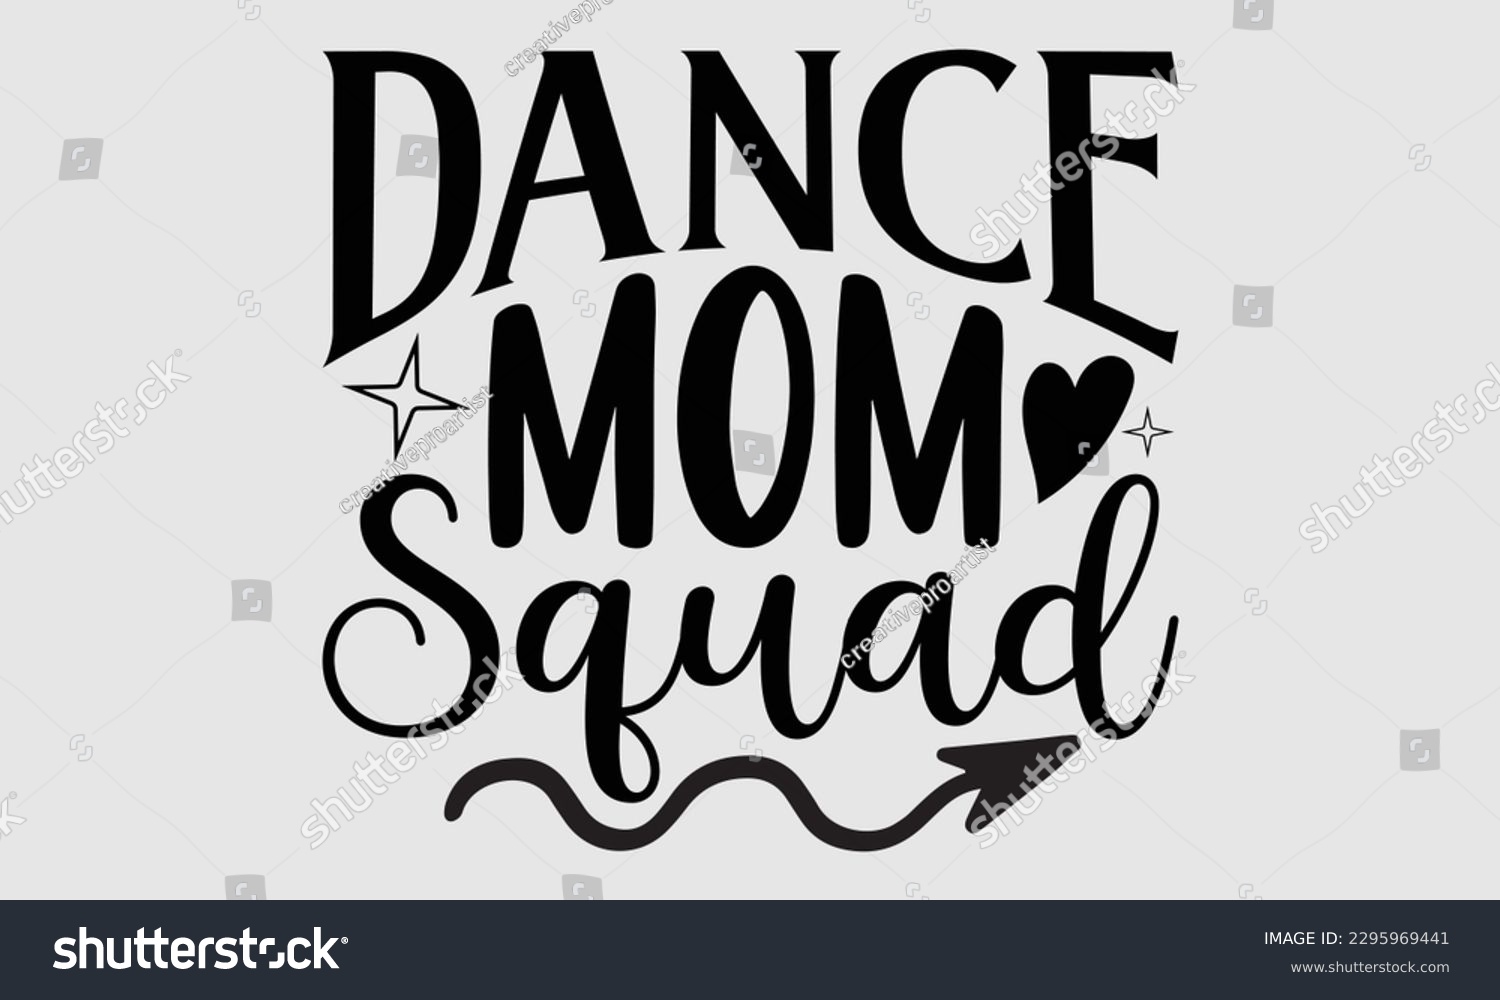 SVG of Dance mom squad- Dances SVG design, Hand drawn lettering phrase, This illustration can be used as a print on t-shirts and bags, Vector Template EPS 10 svg